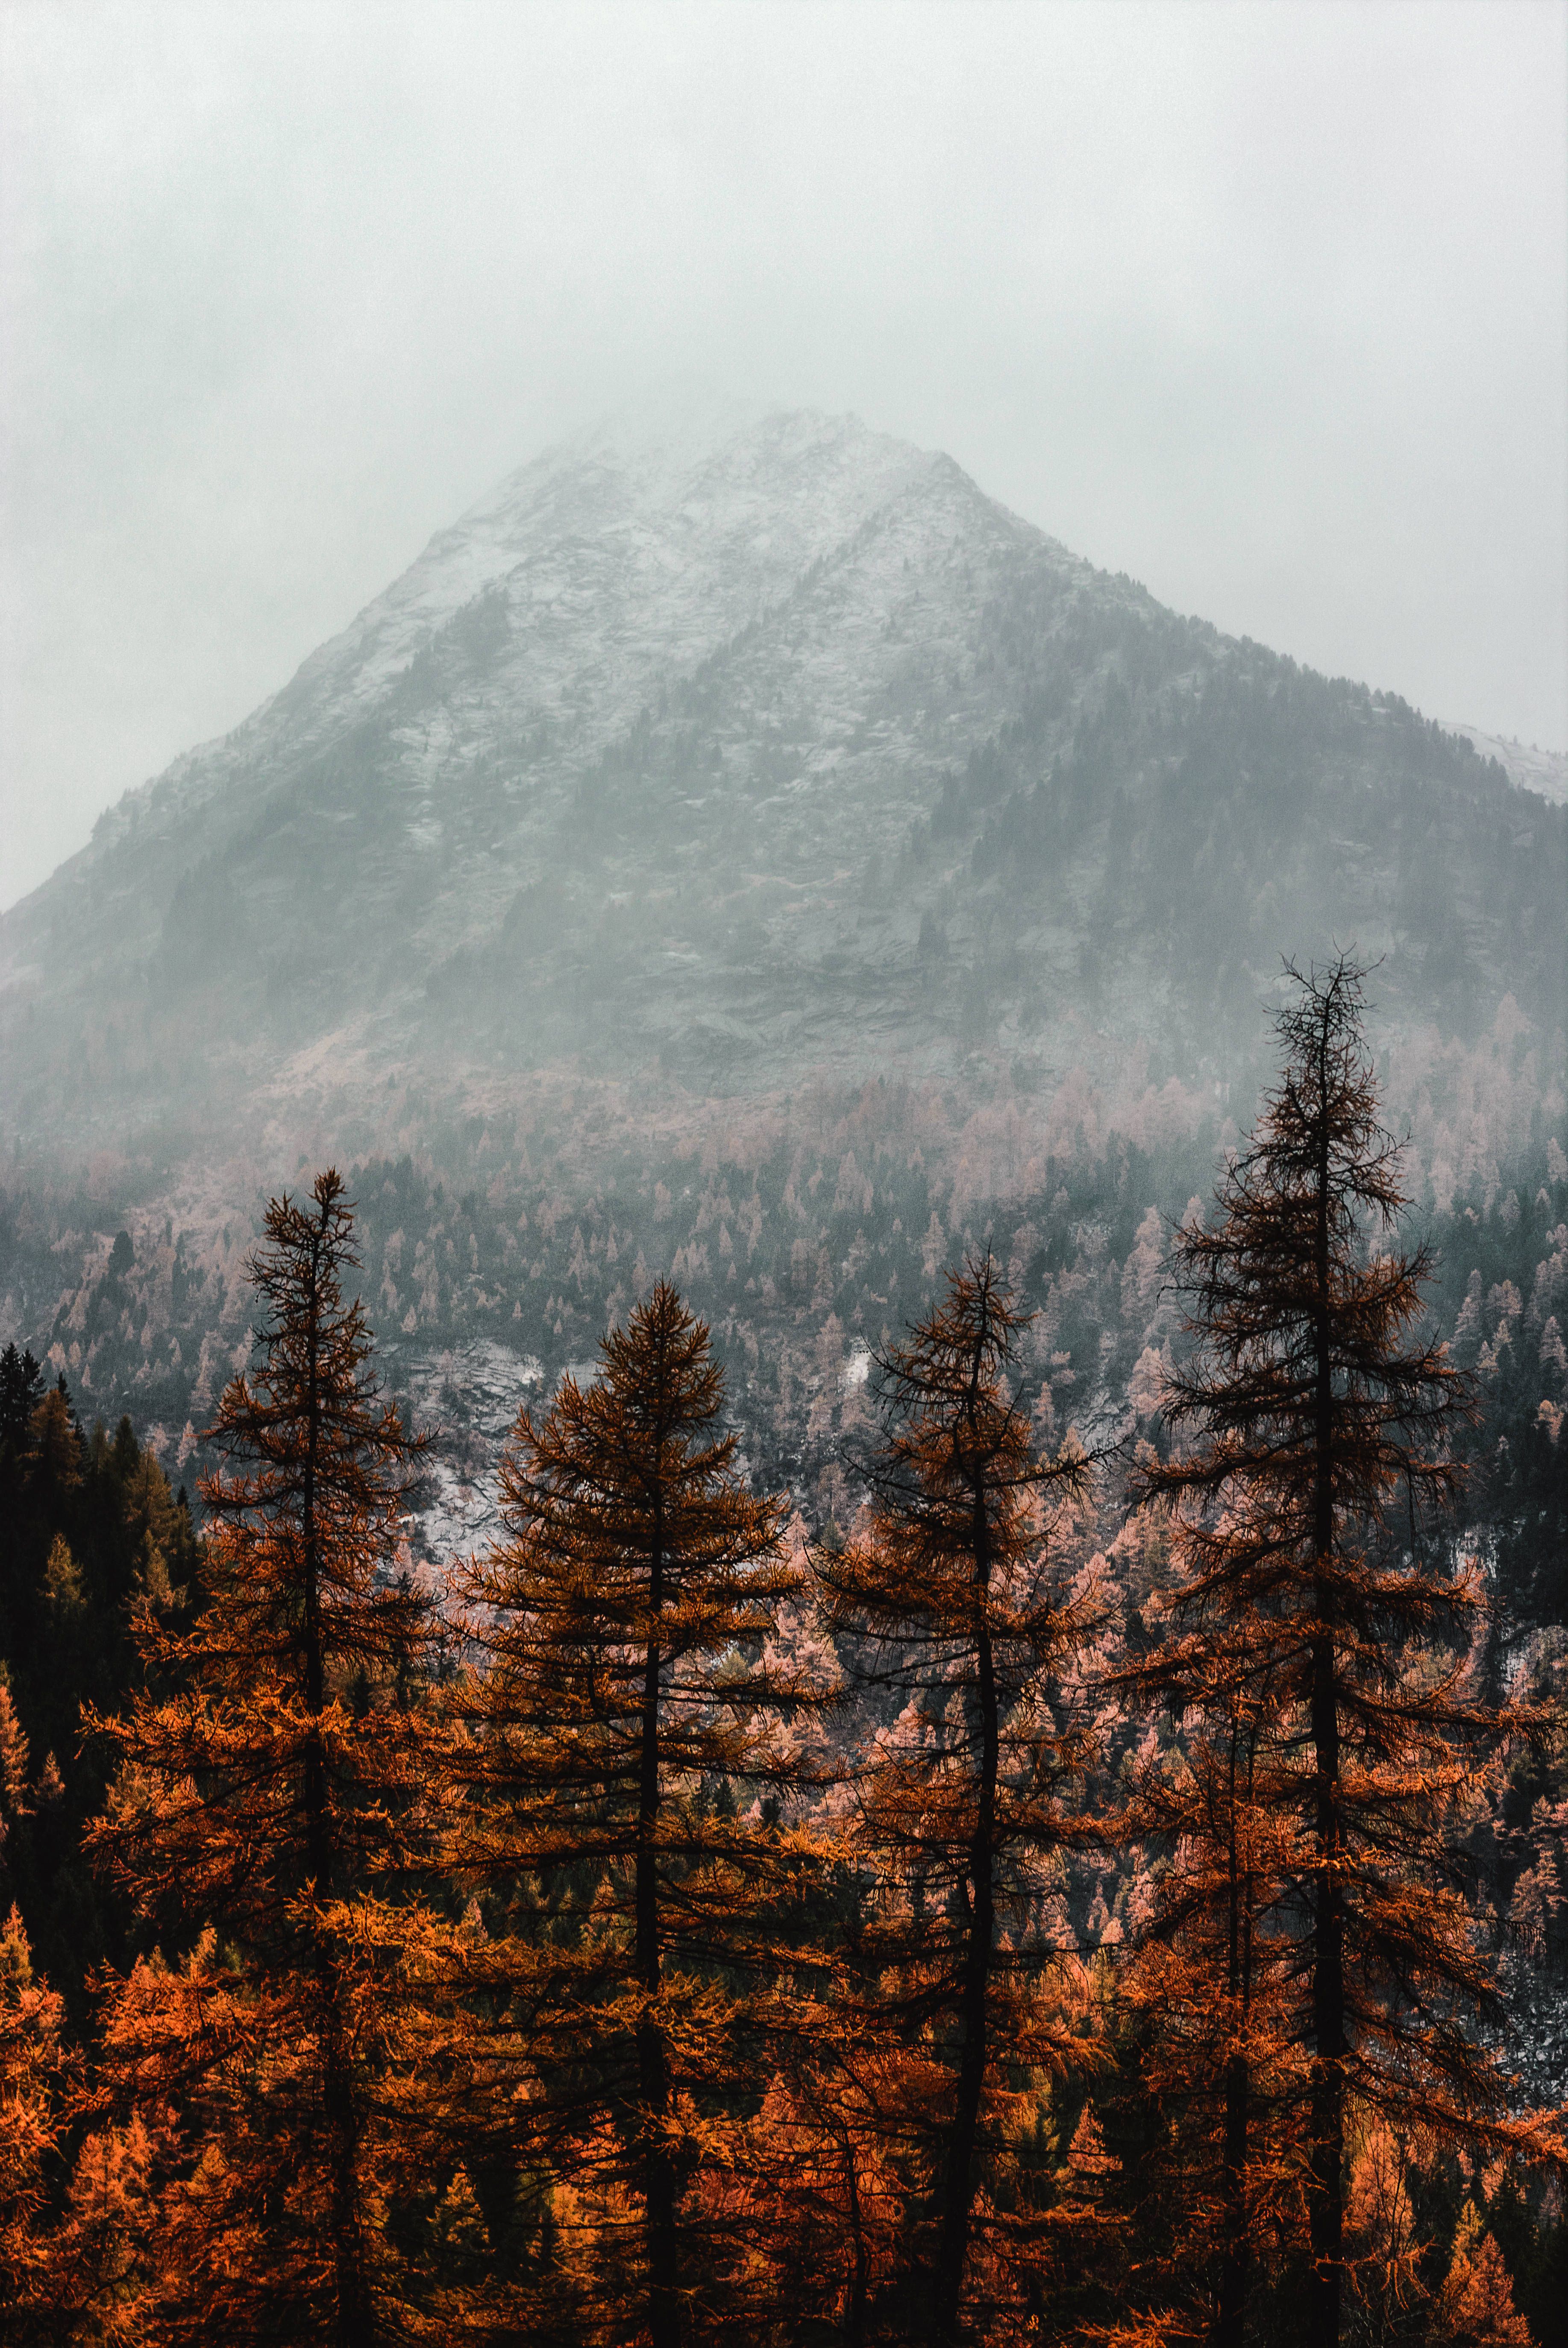 A mountain with trees and fog in the background - Mountain